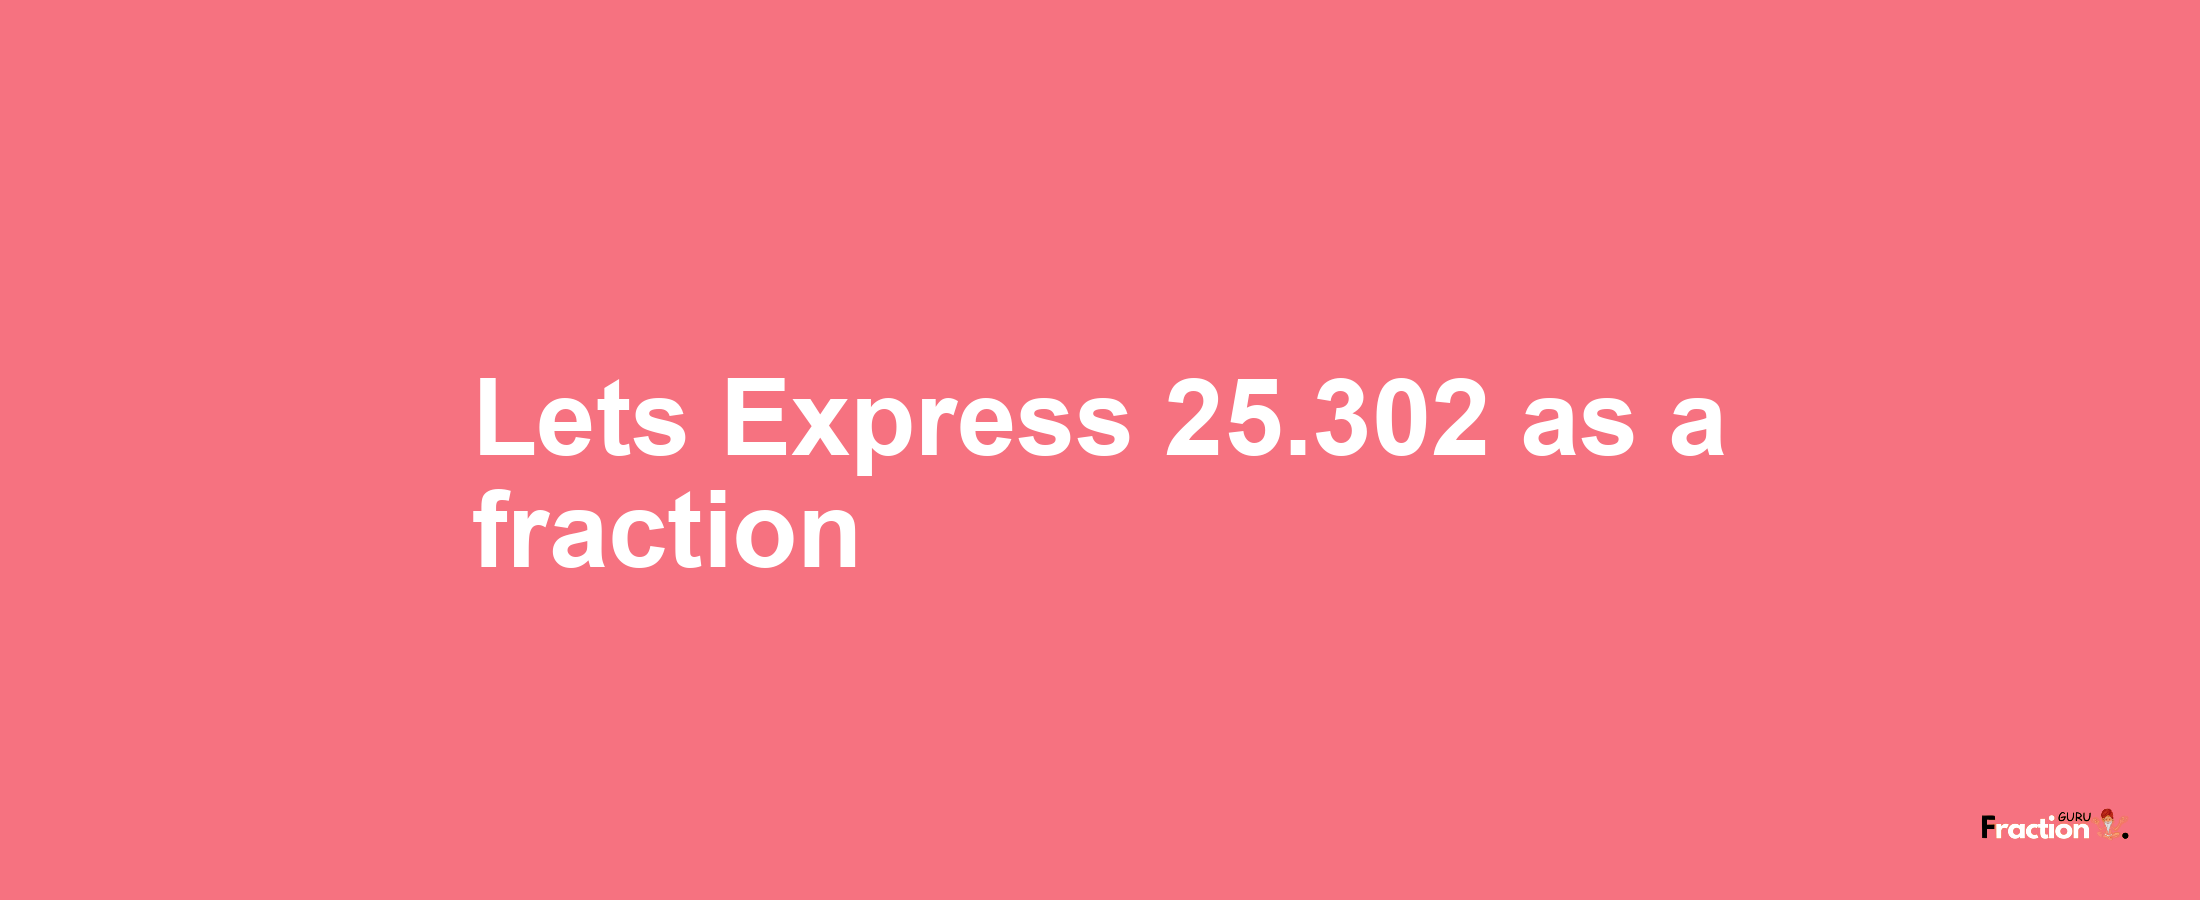 Lets Express 25.302 as afraction